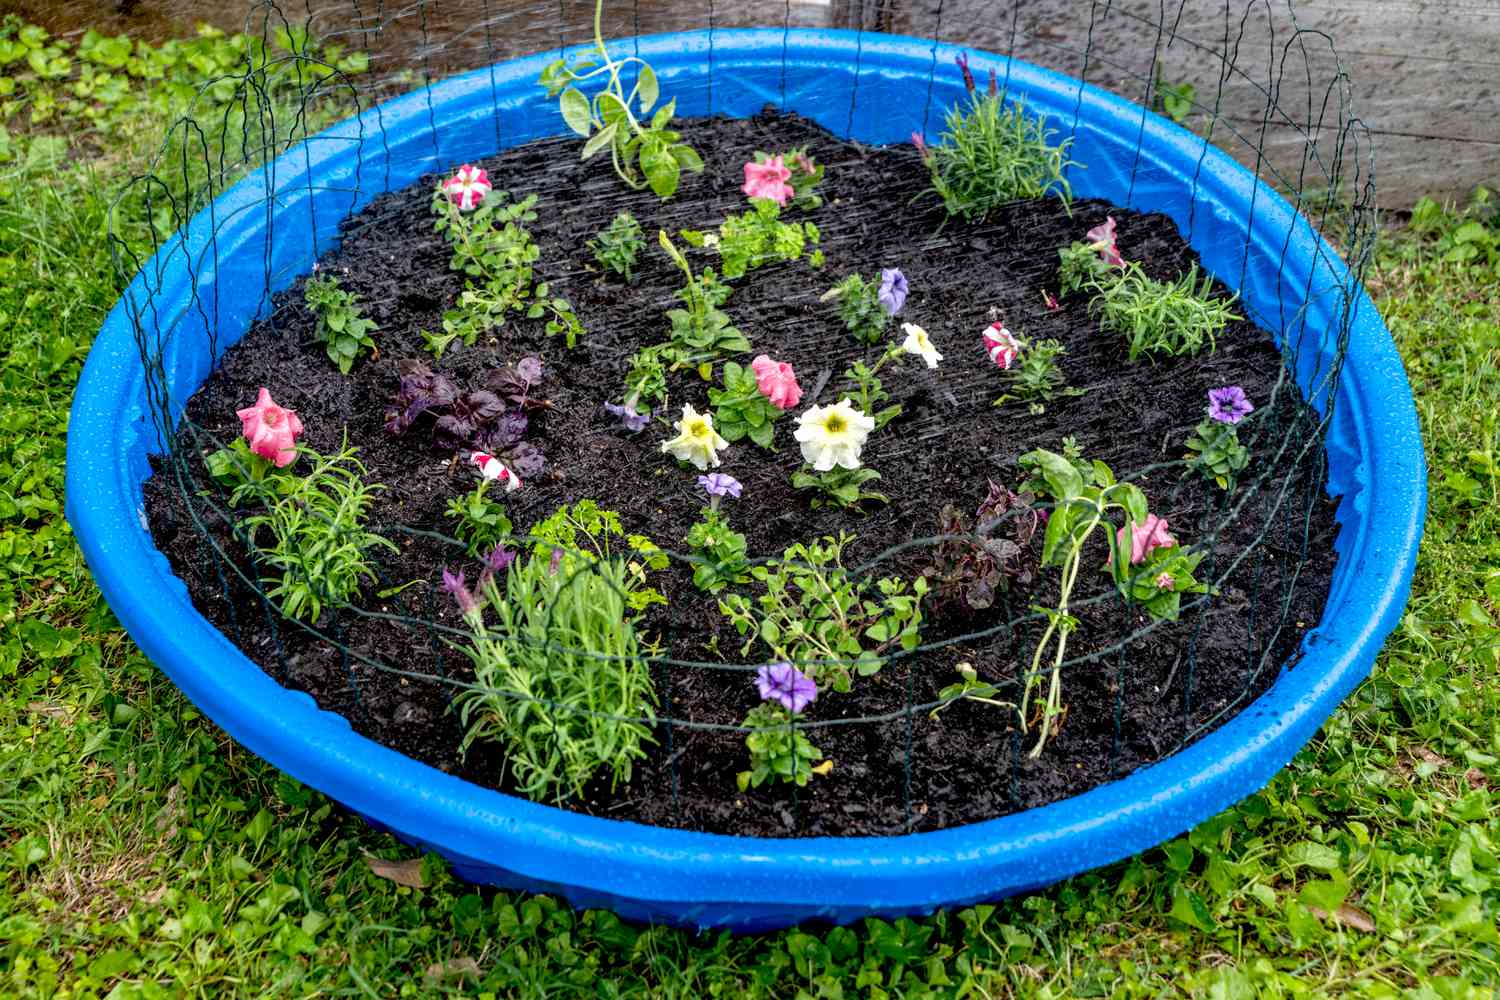 Kiddie pool with planted flowers and vegetable plants being watered